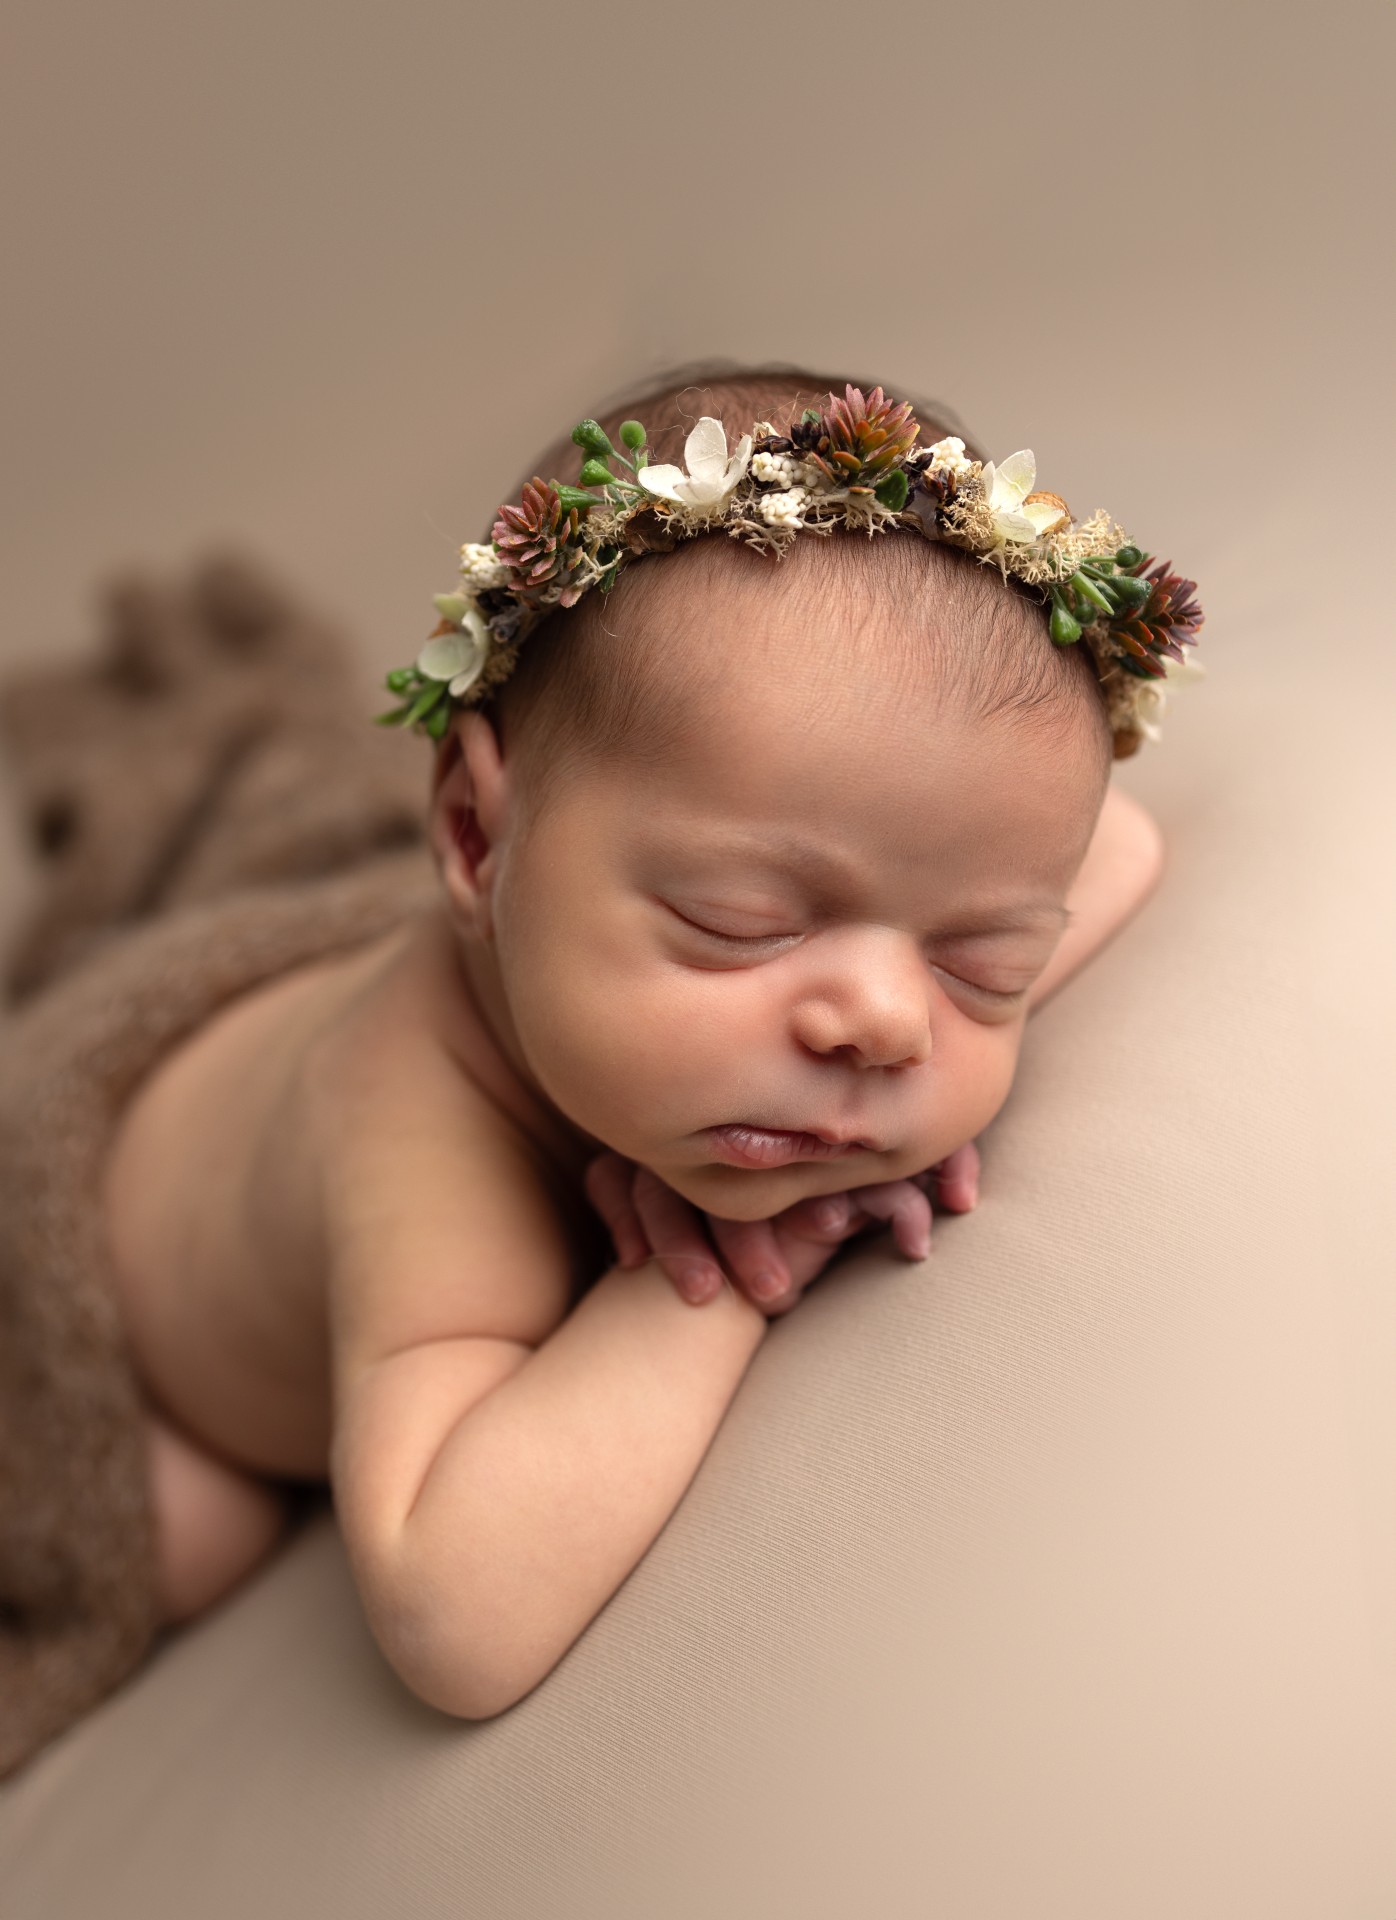 baby with a flower crown